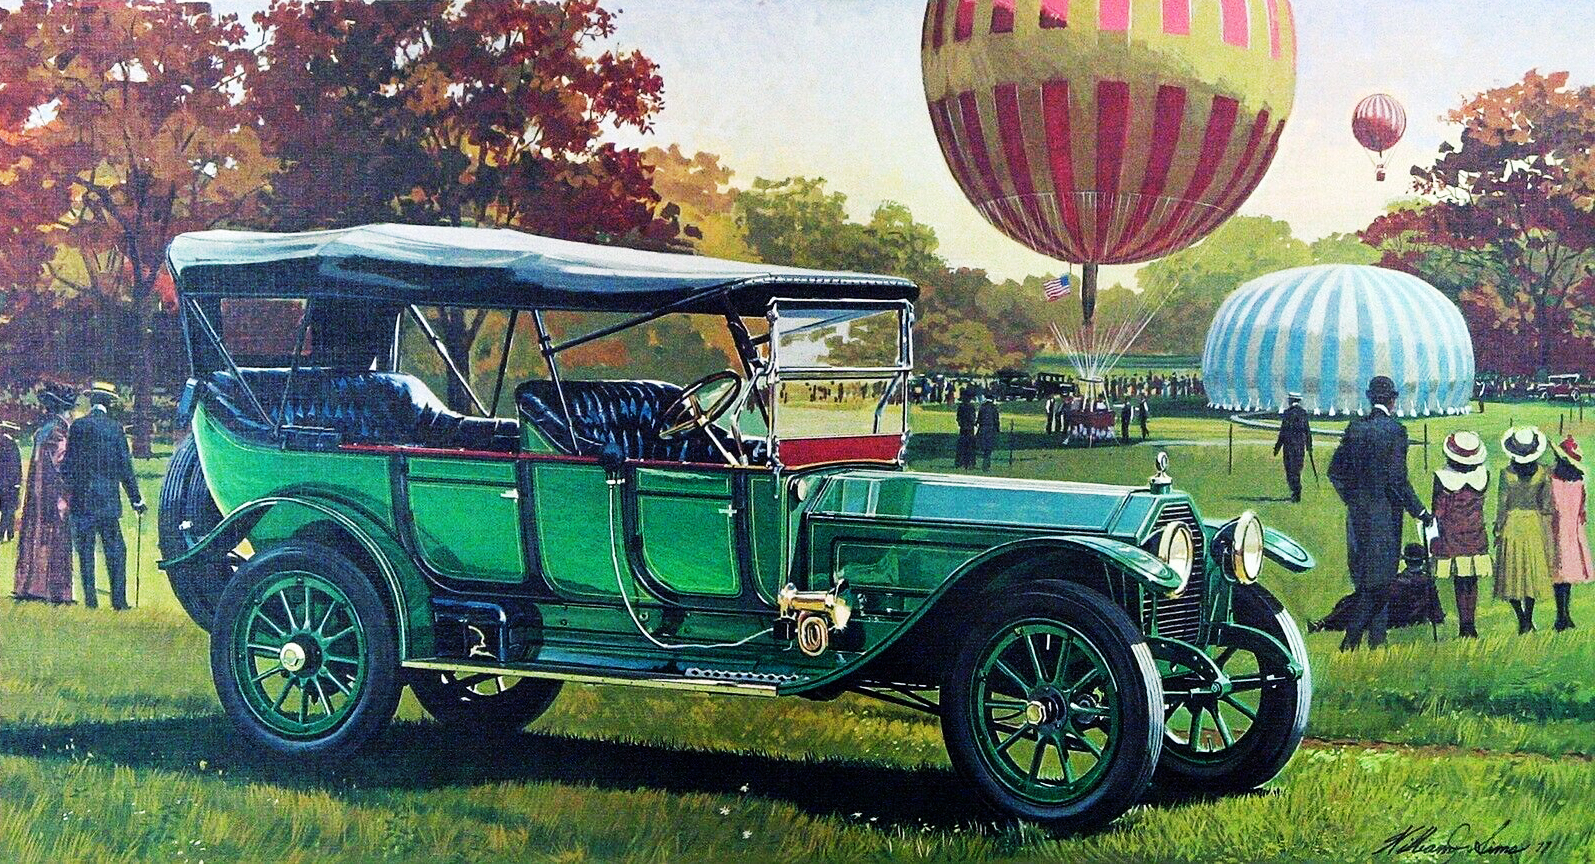 1914 Peerless Model 60-Six Seven Passenger Touring: Illustrated by William J. Sims